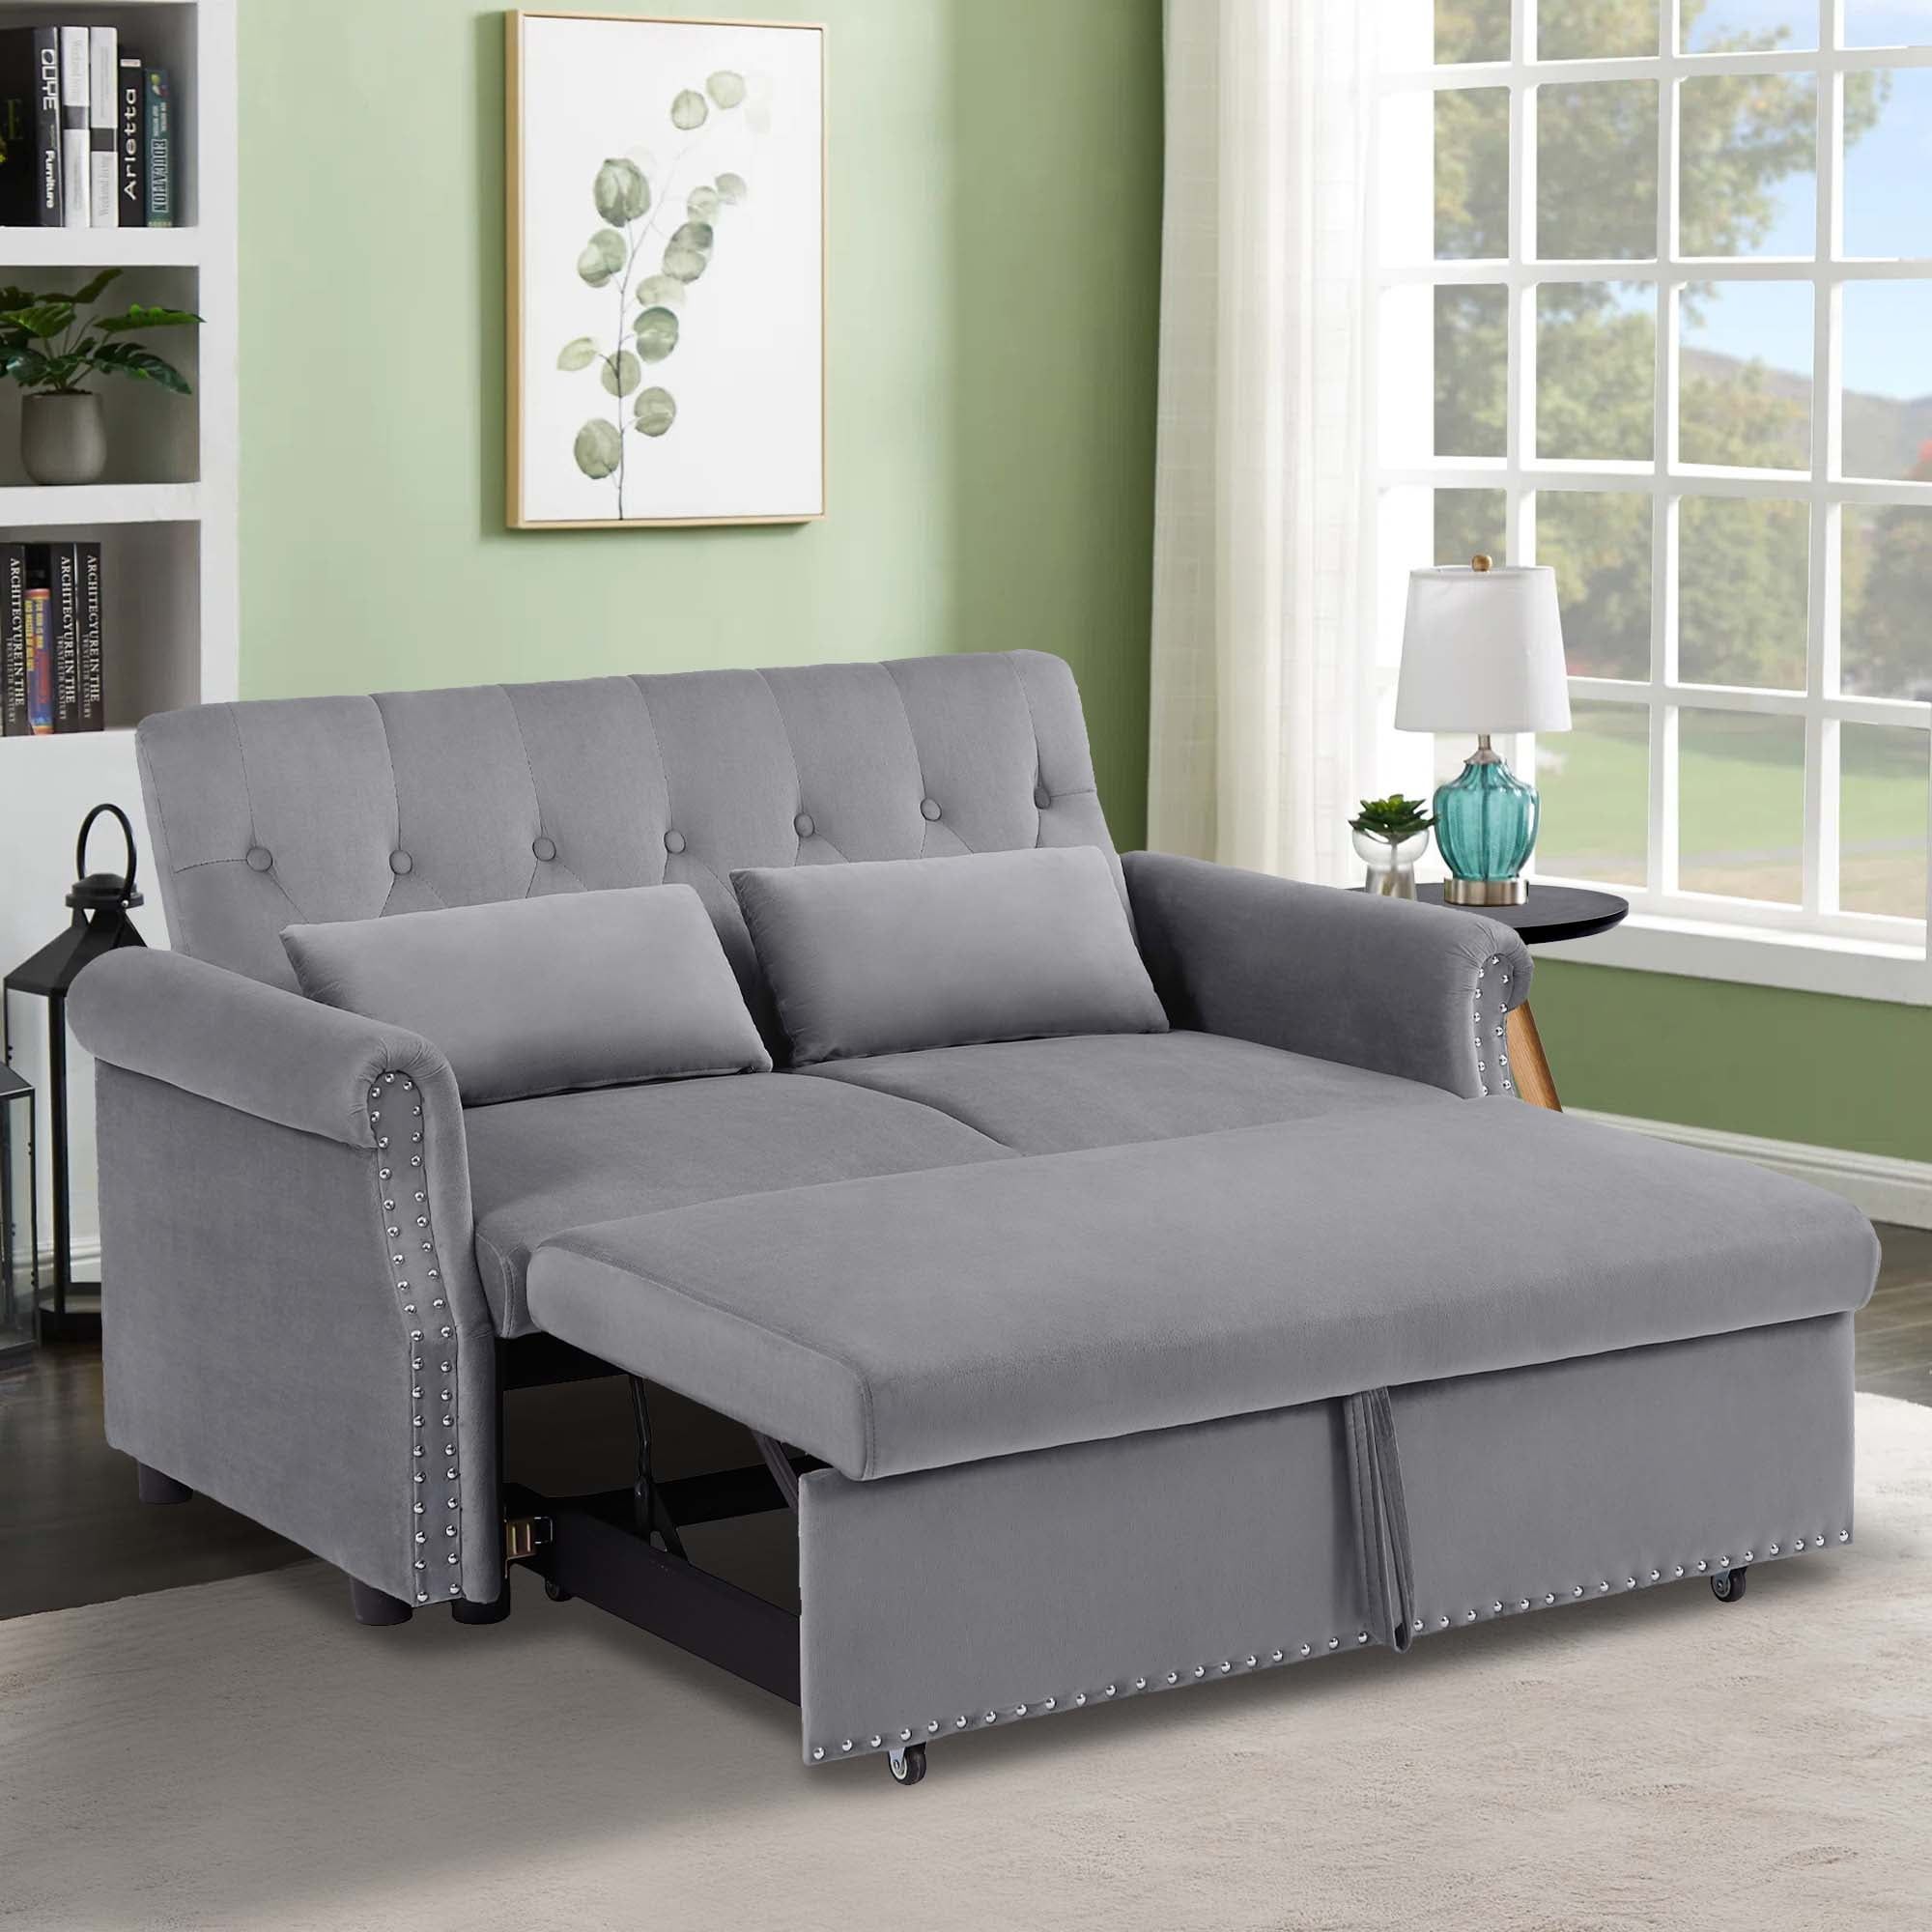 Aukfa 55" Convertible Sleeper Sofa Bed With Pull Out Couch, Velvet Tufted  Button Backrest Loveseat – Gray – Walmart Intended For Tufted Convertible Sleeper Sofas (Photo 7 of 15)